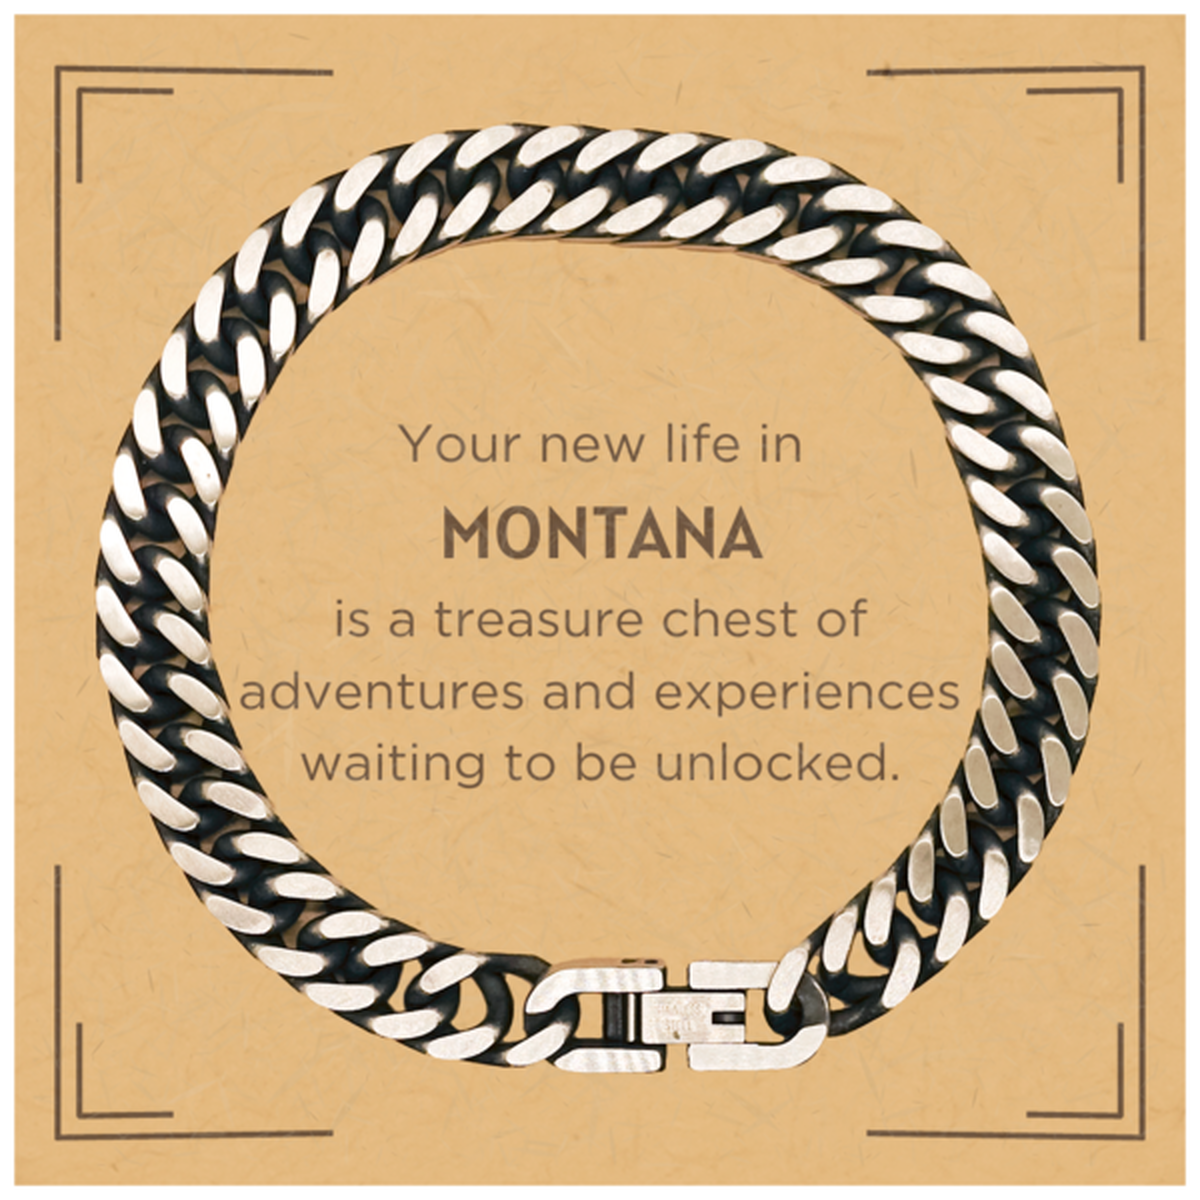 Moving to Montana Gifts, Your new life in Montana, Long Distance Montana Christmas Cuban Link Chain Bracelet For Men, Women, Friends, Coworkers